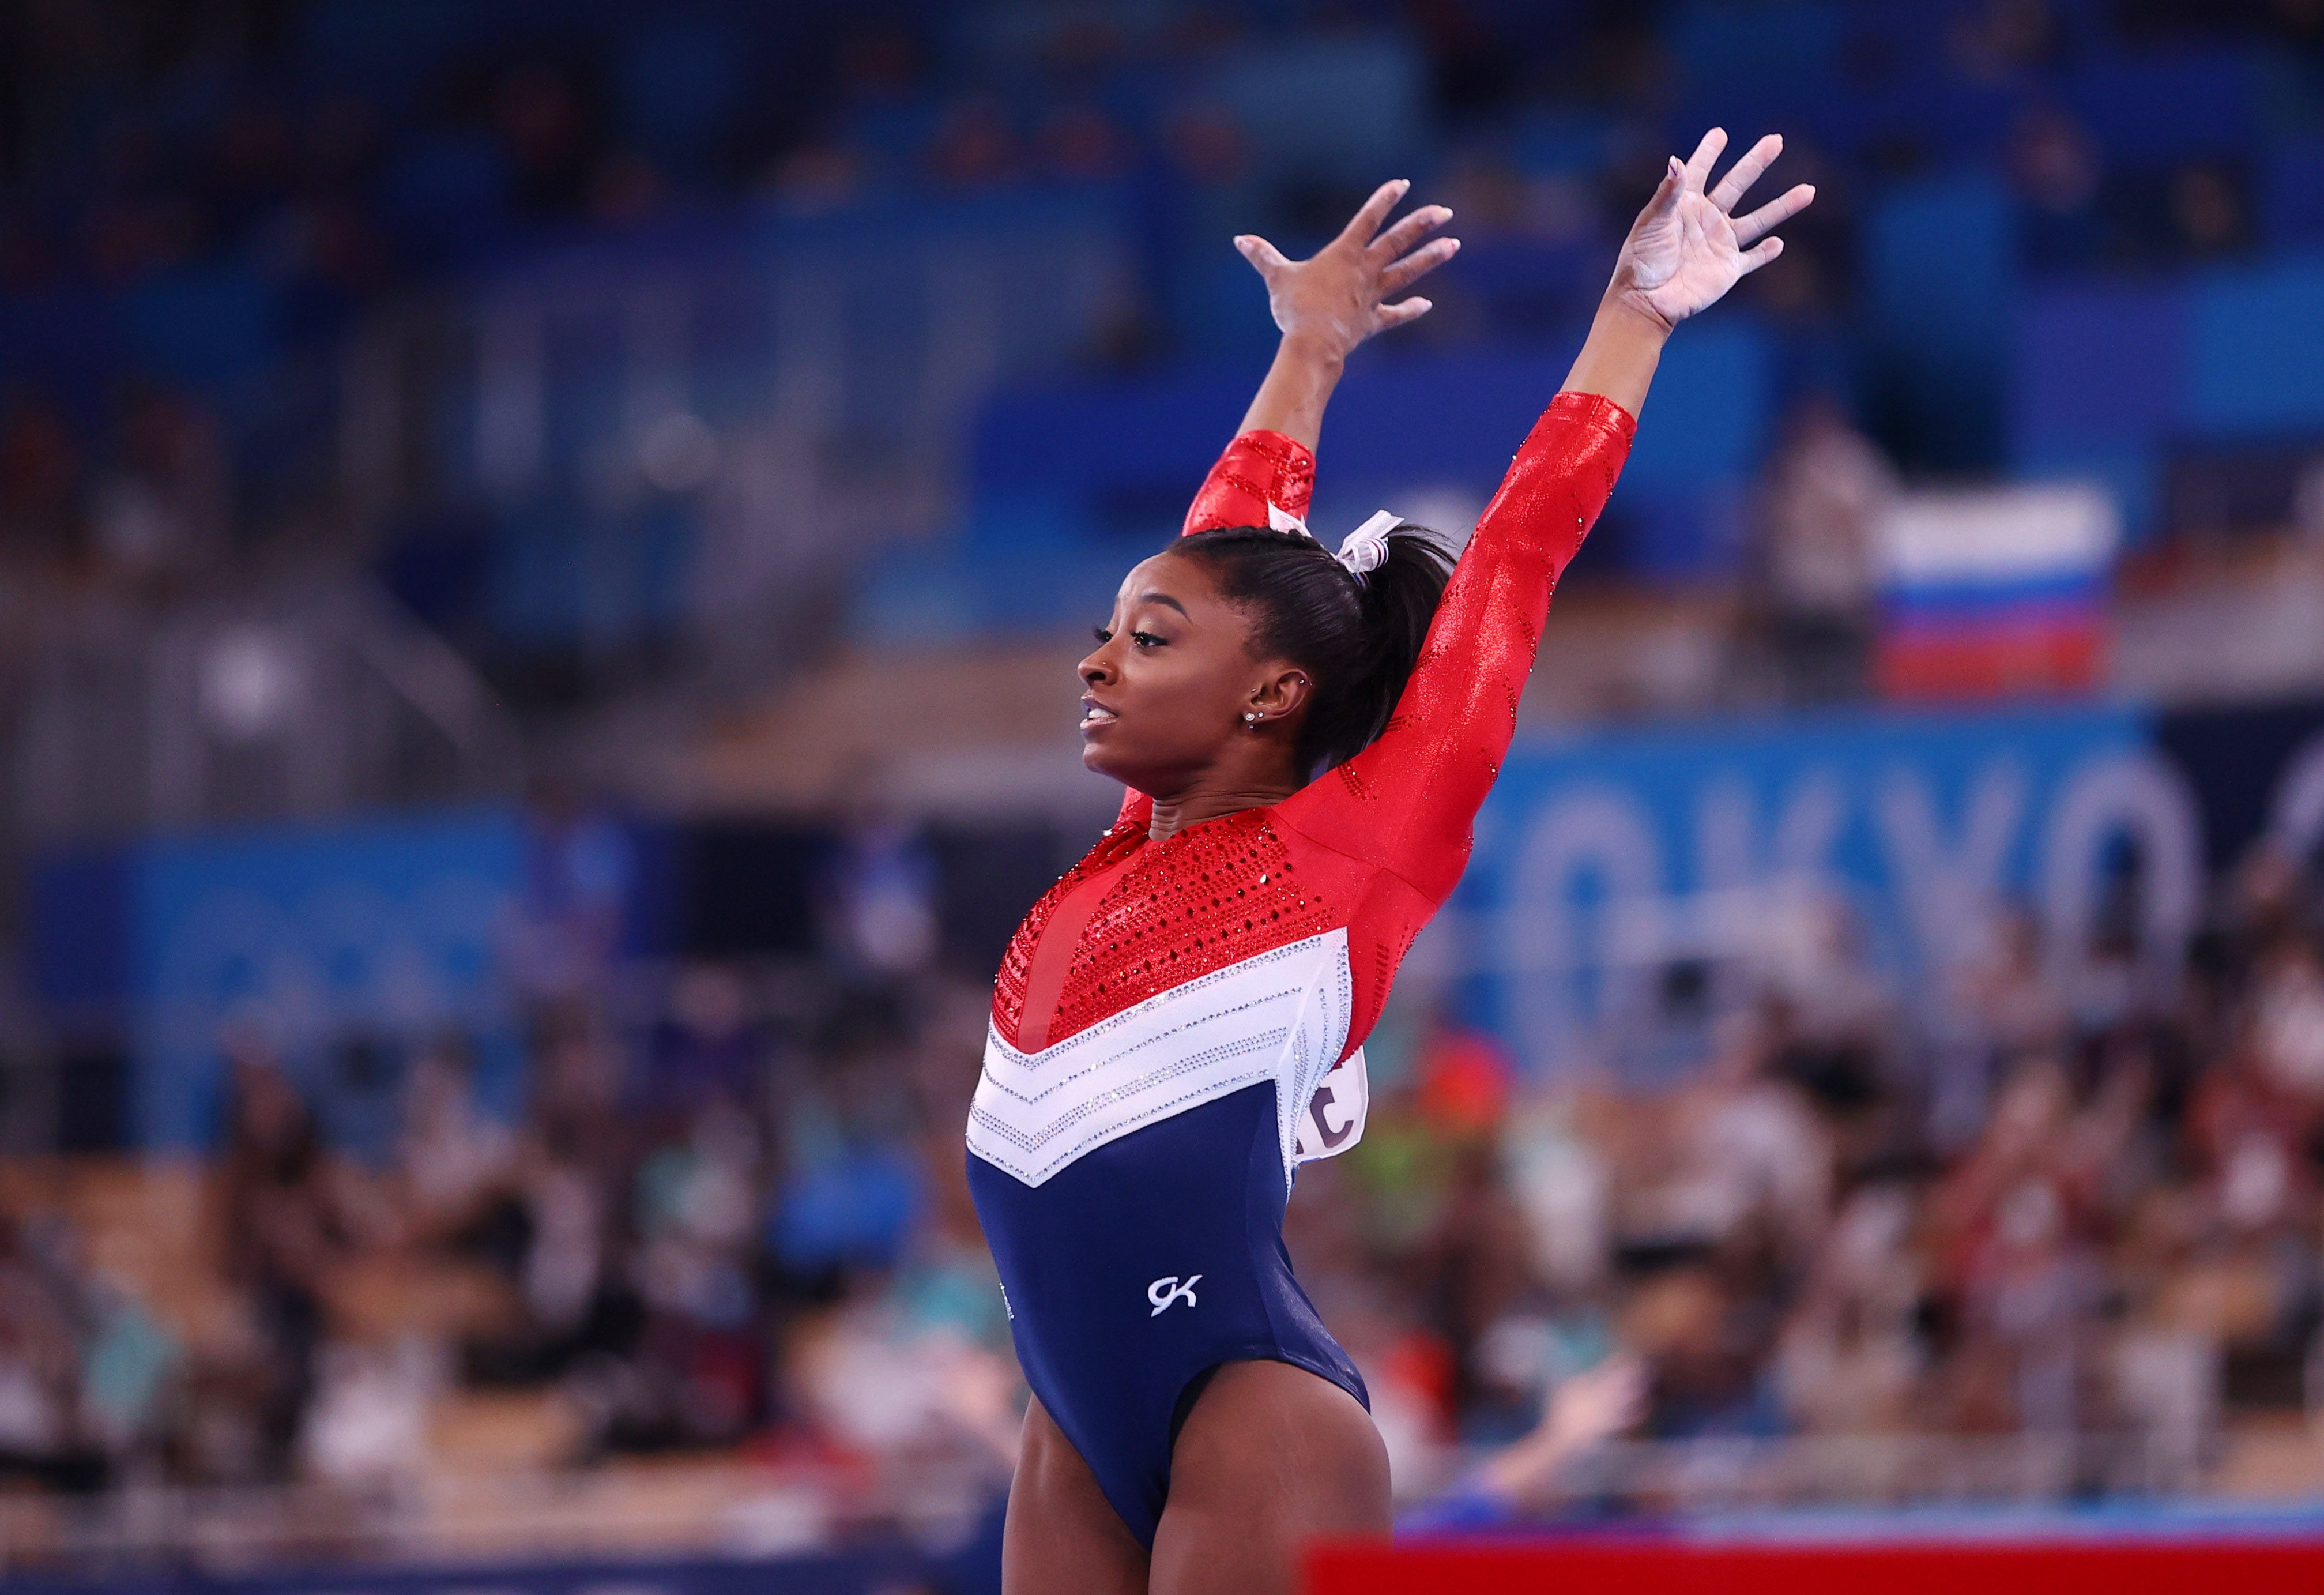 Gymnastics star Biles returns to competition after two-year hiatus